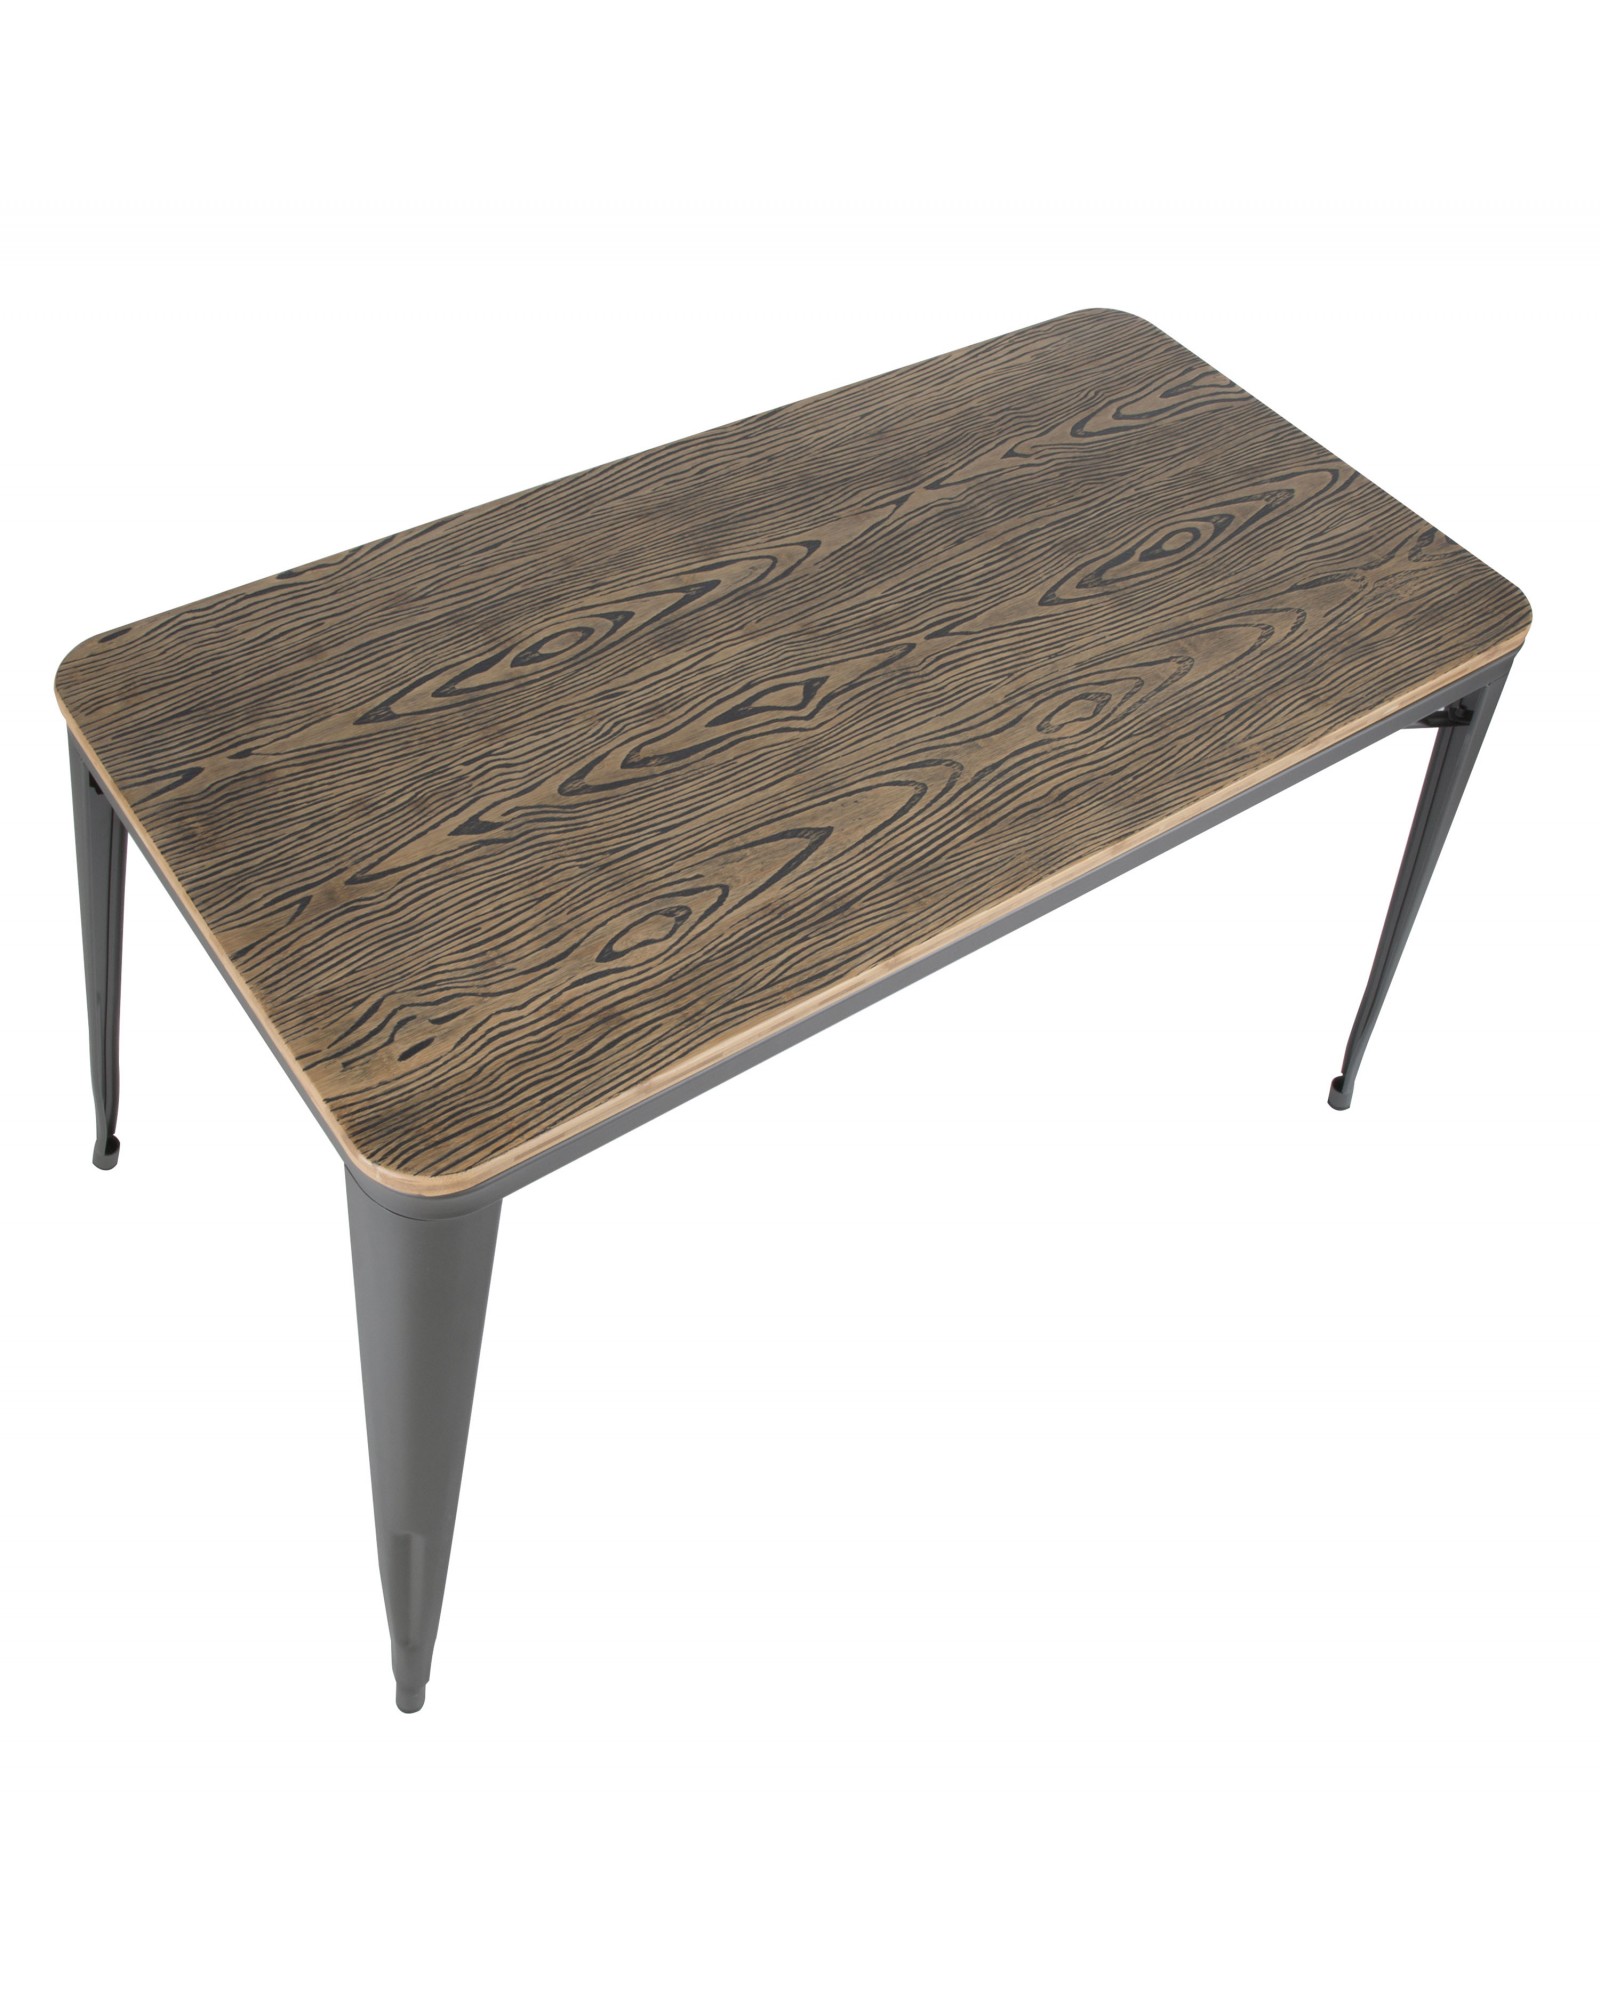 Oregon Industrial-Farmhouse Utility Table in Grey and Brown